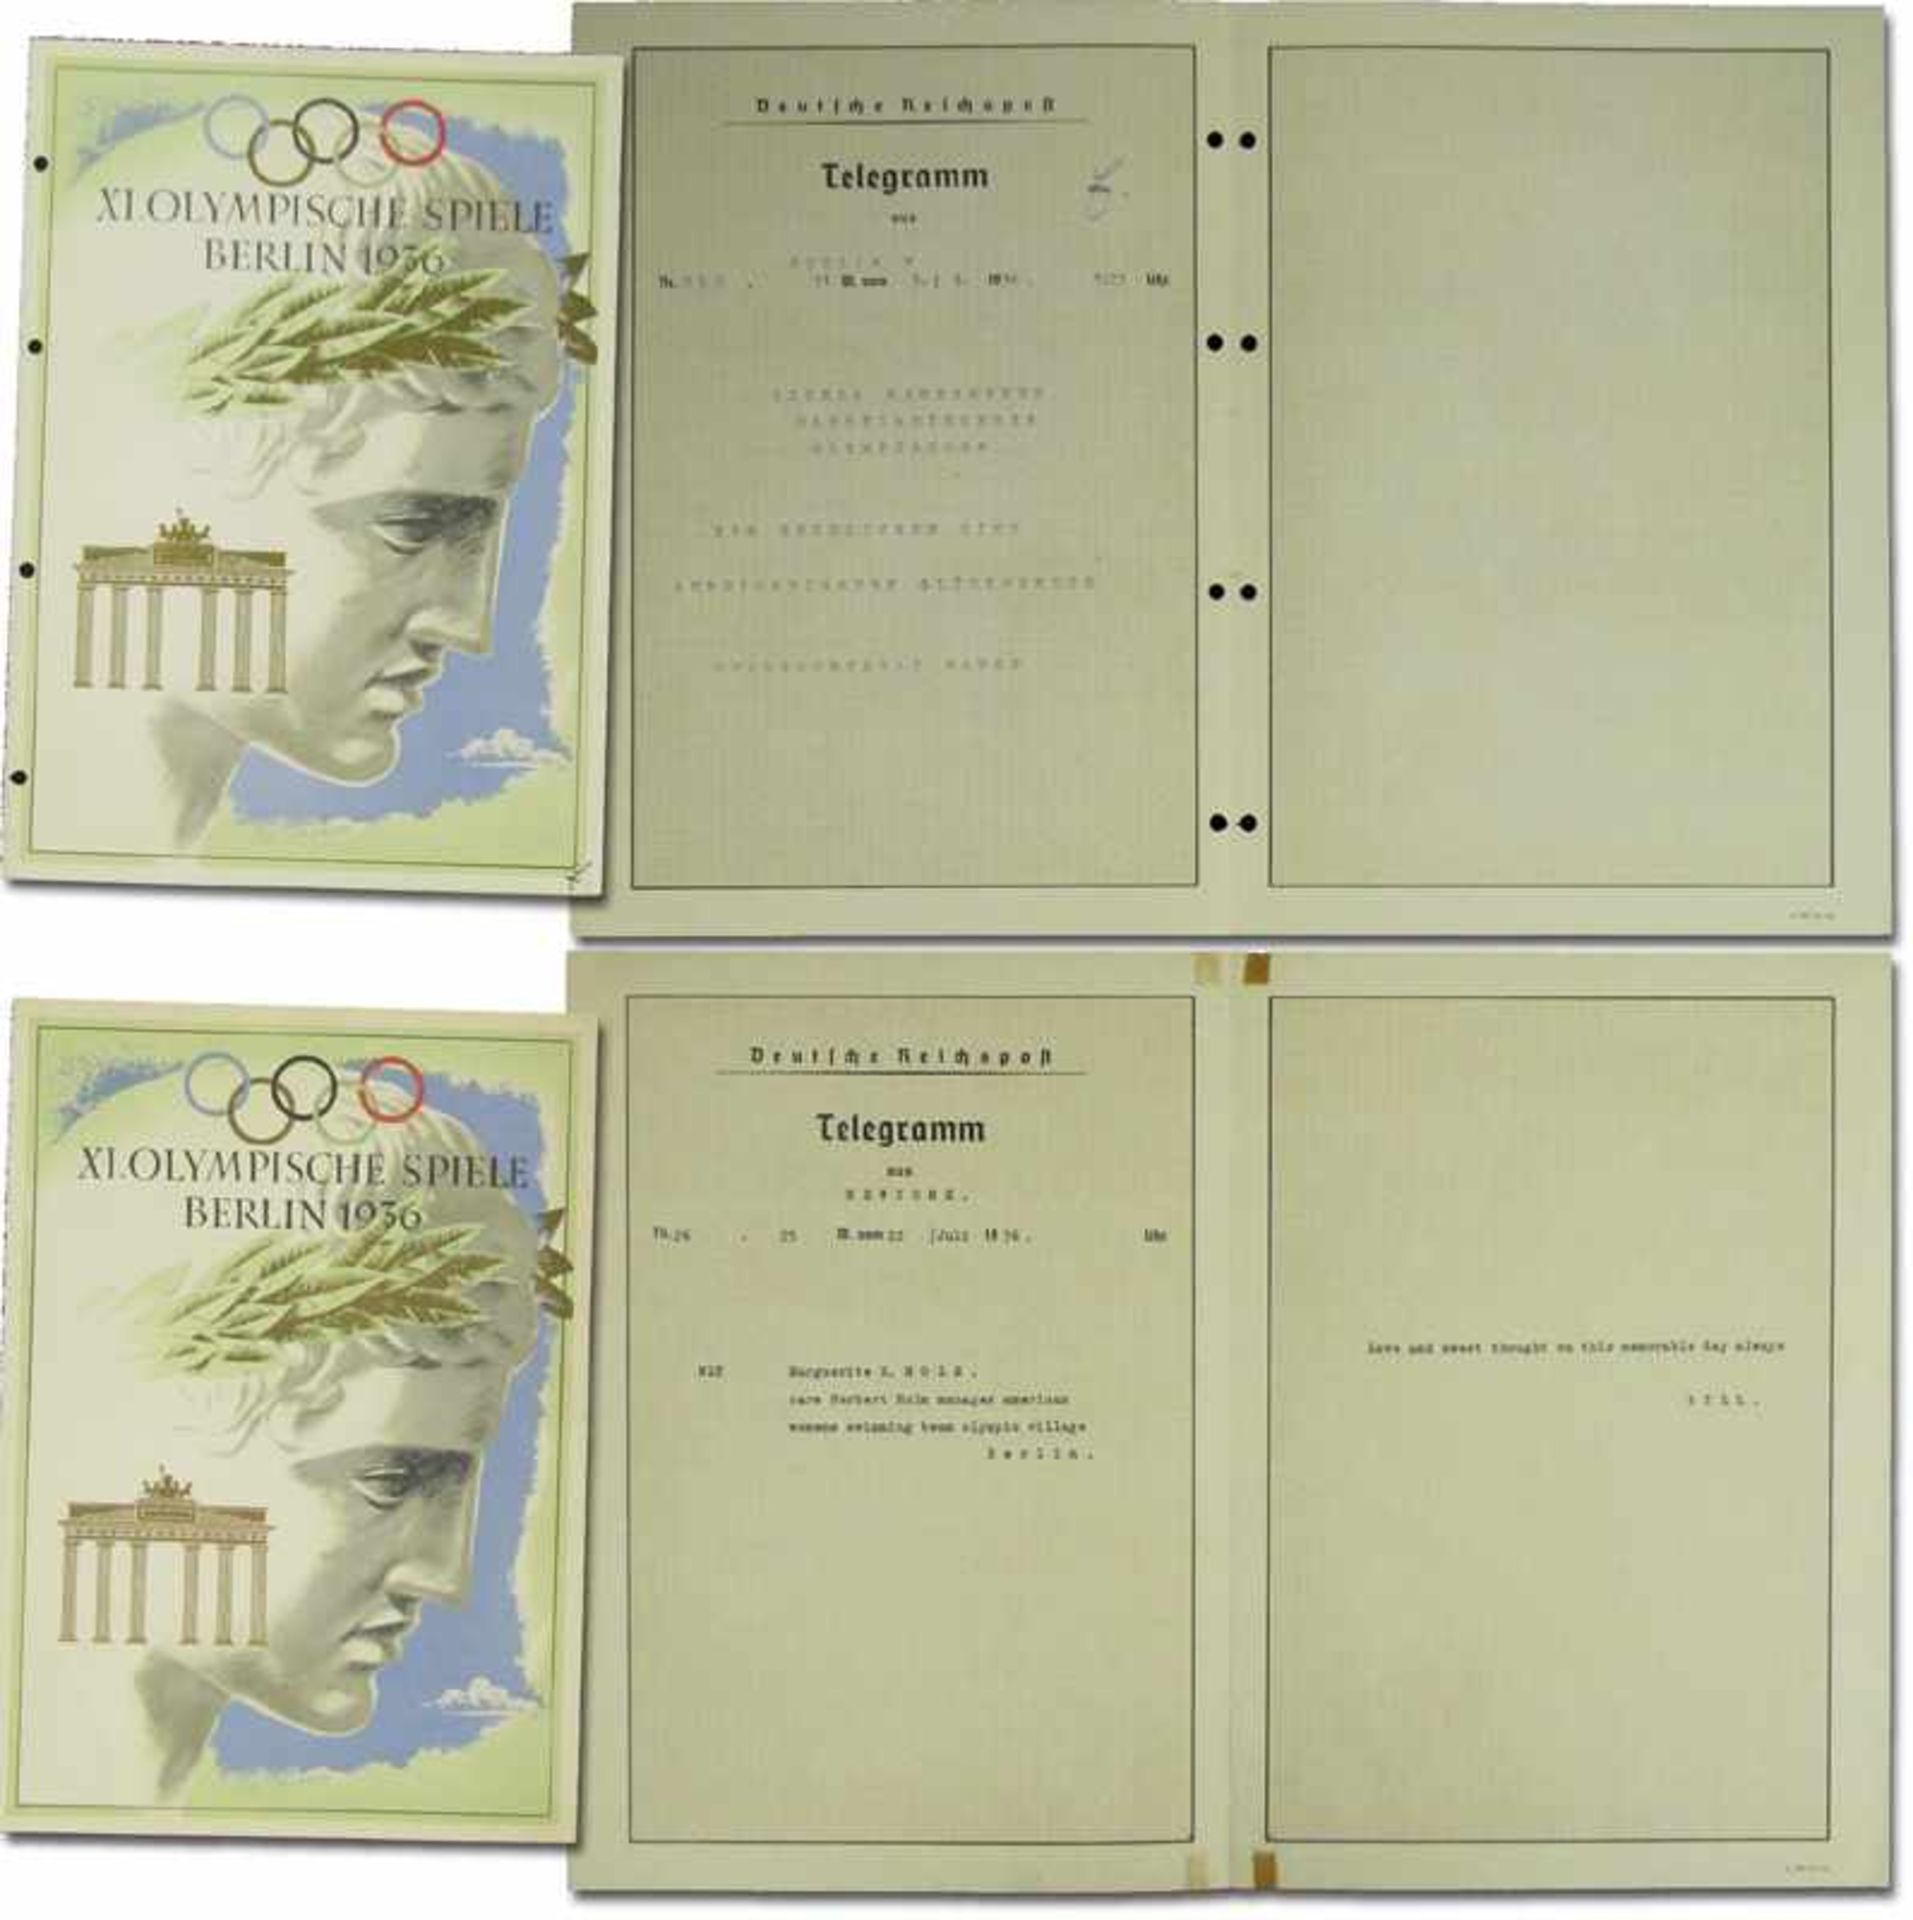 Olympic Games Berlin 1936 2 Official Telegrams - Two official Olympic Games telegrams from the